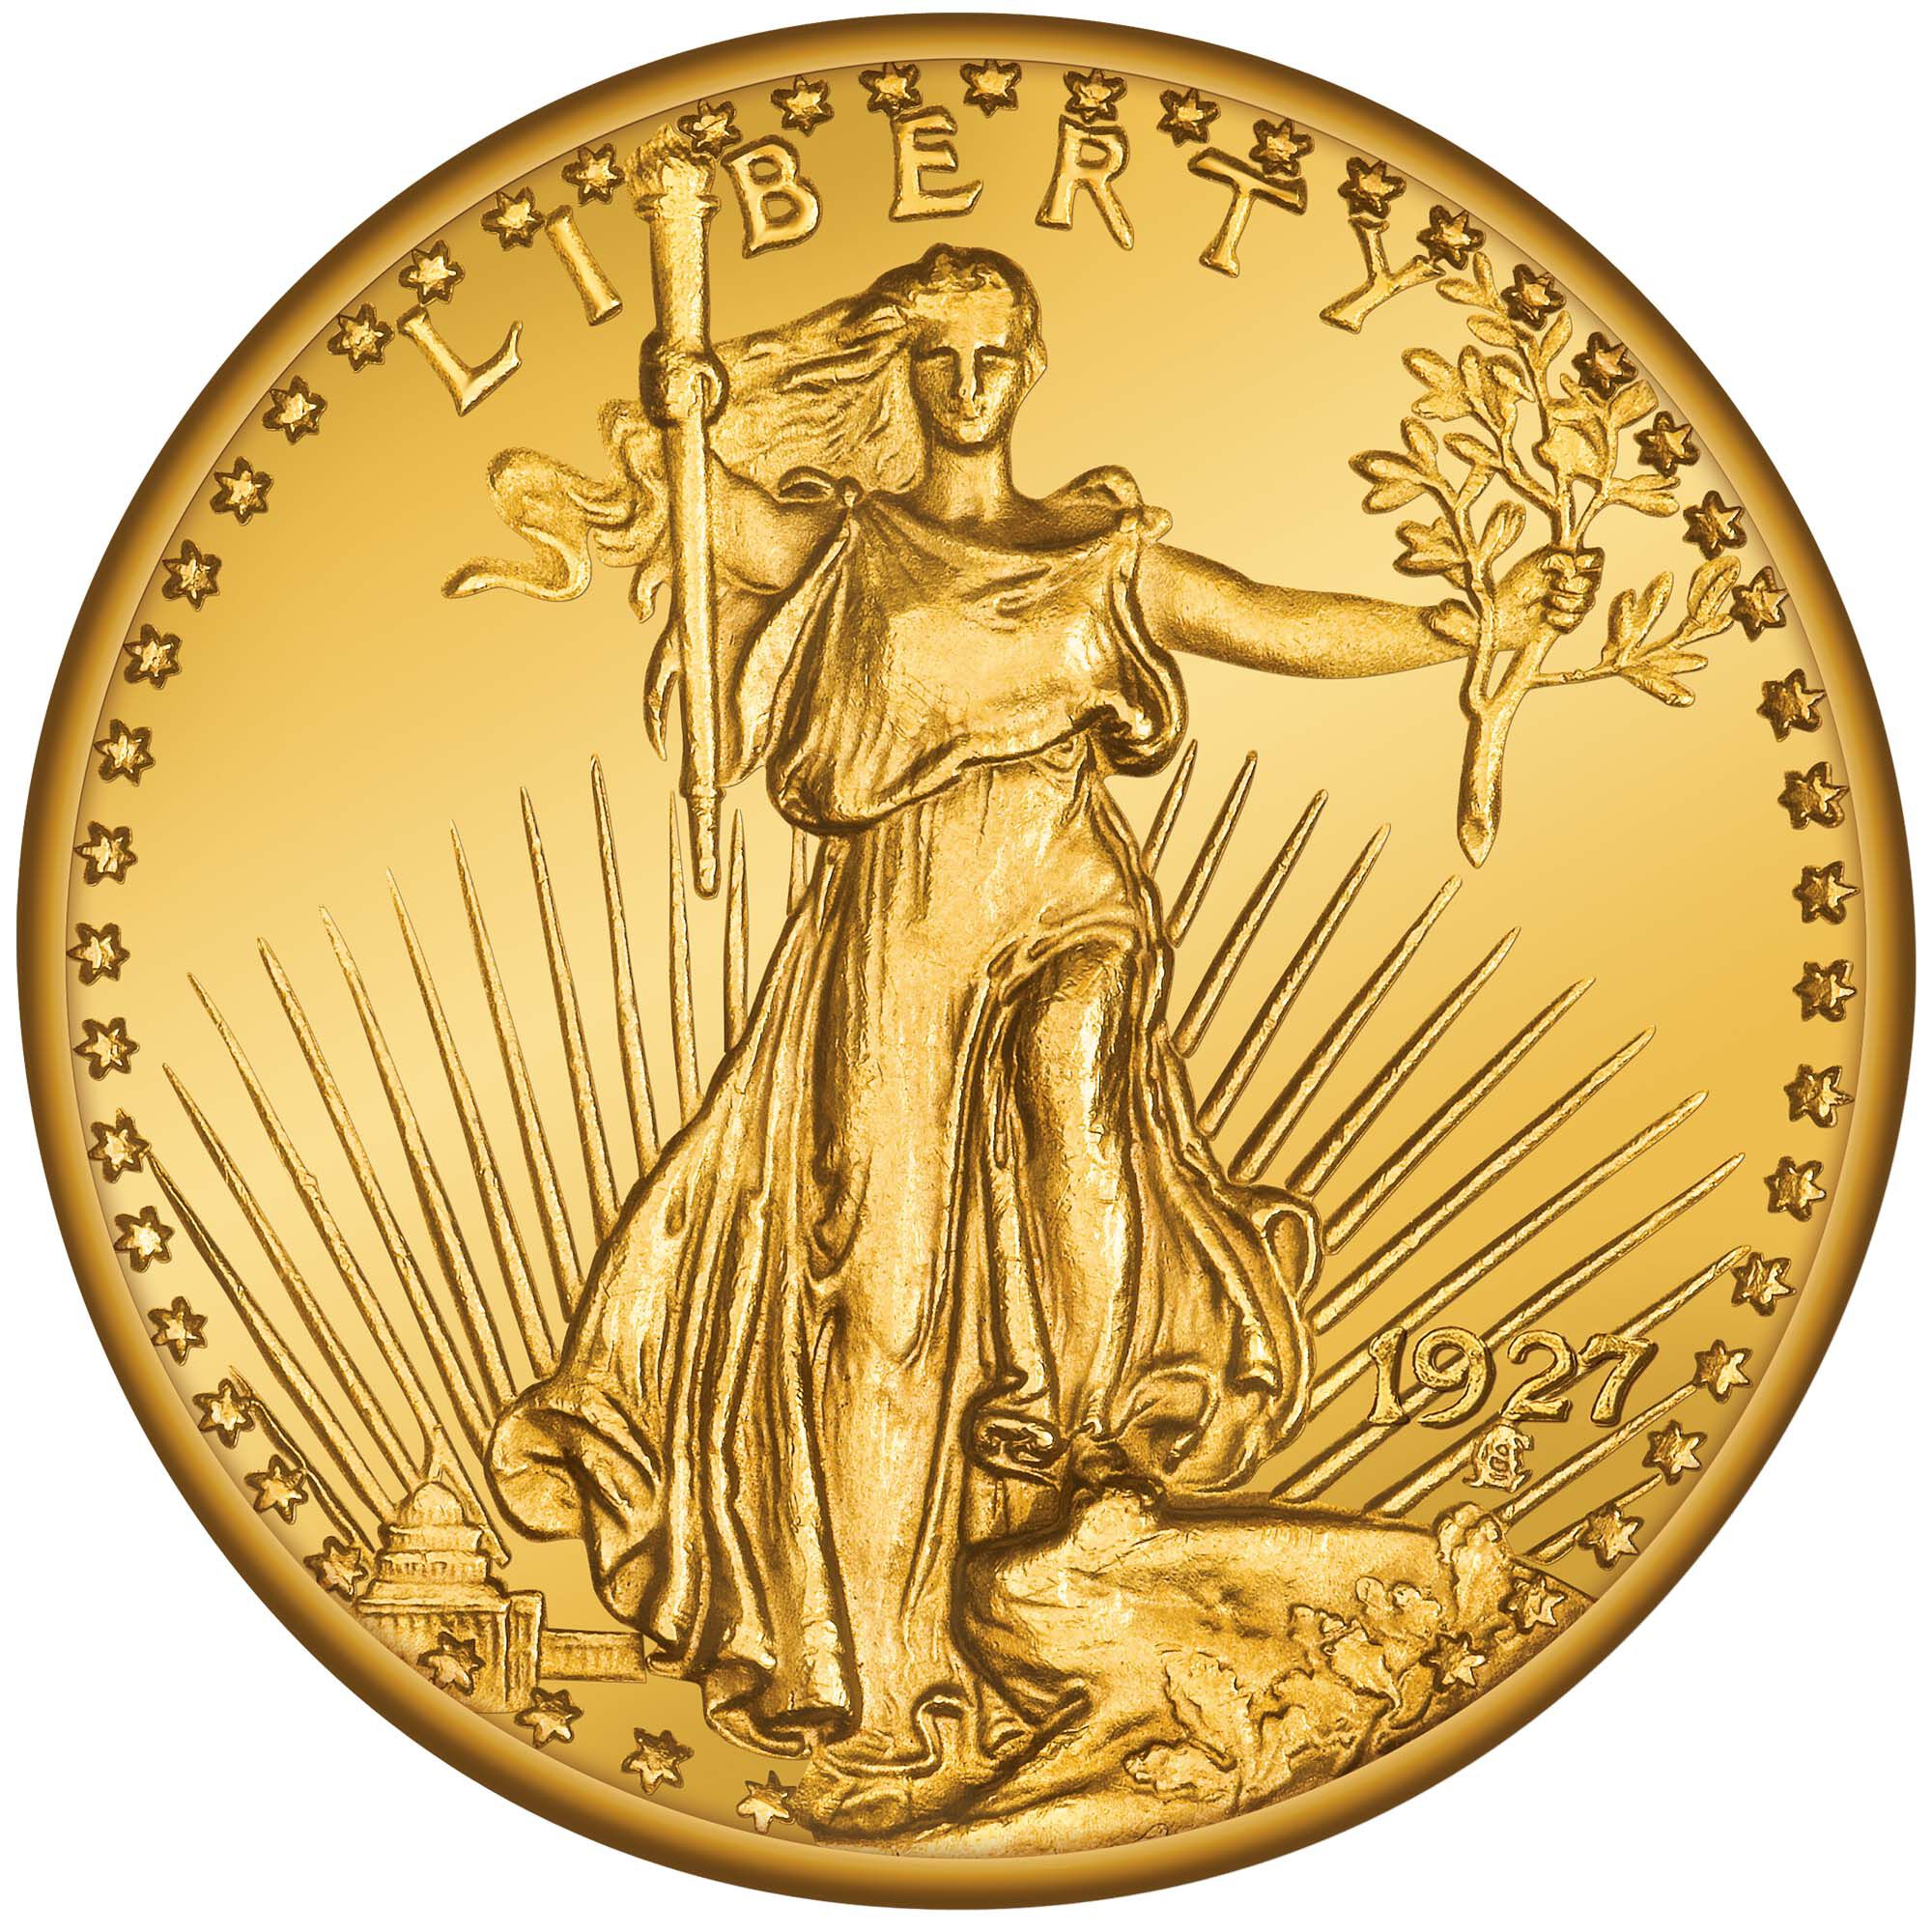 Four Centuries of America's Largest Gold Coins